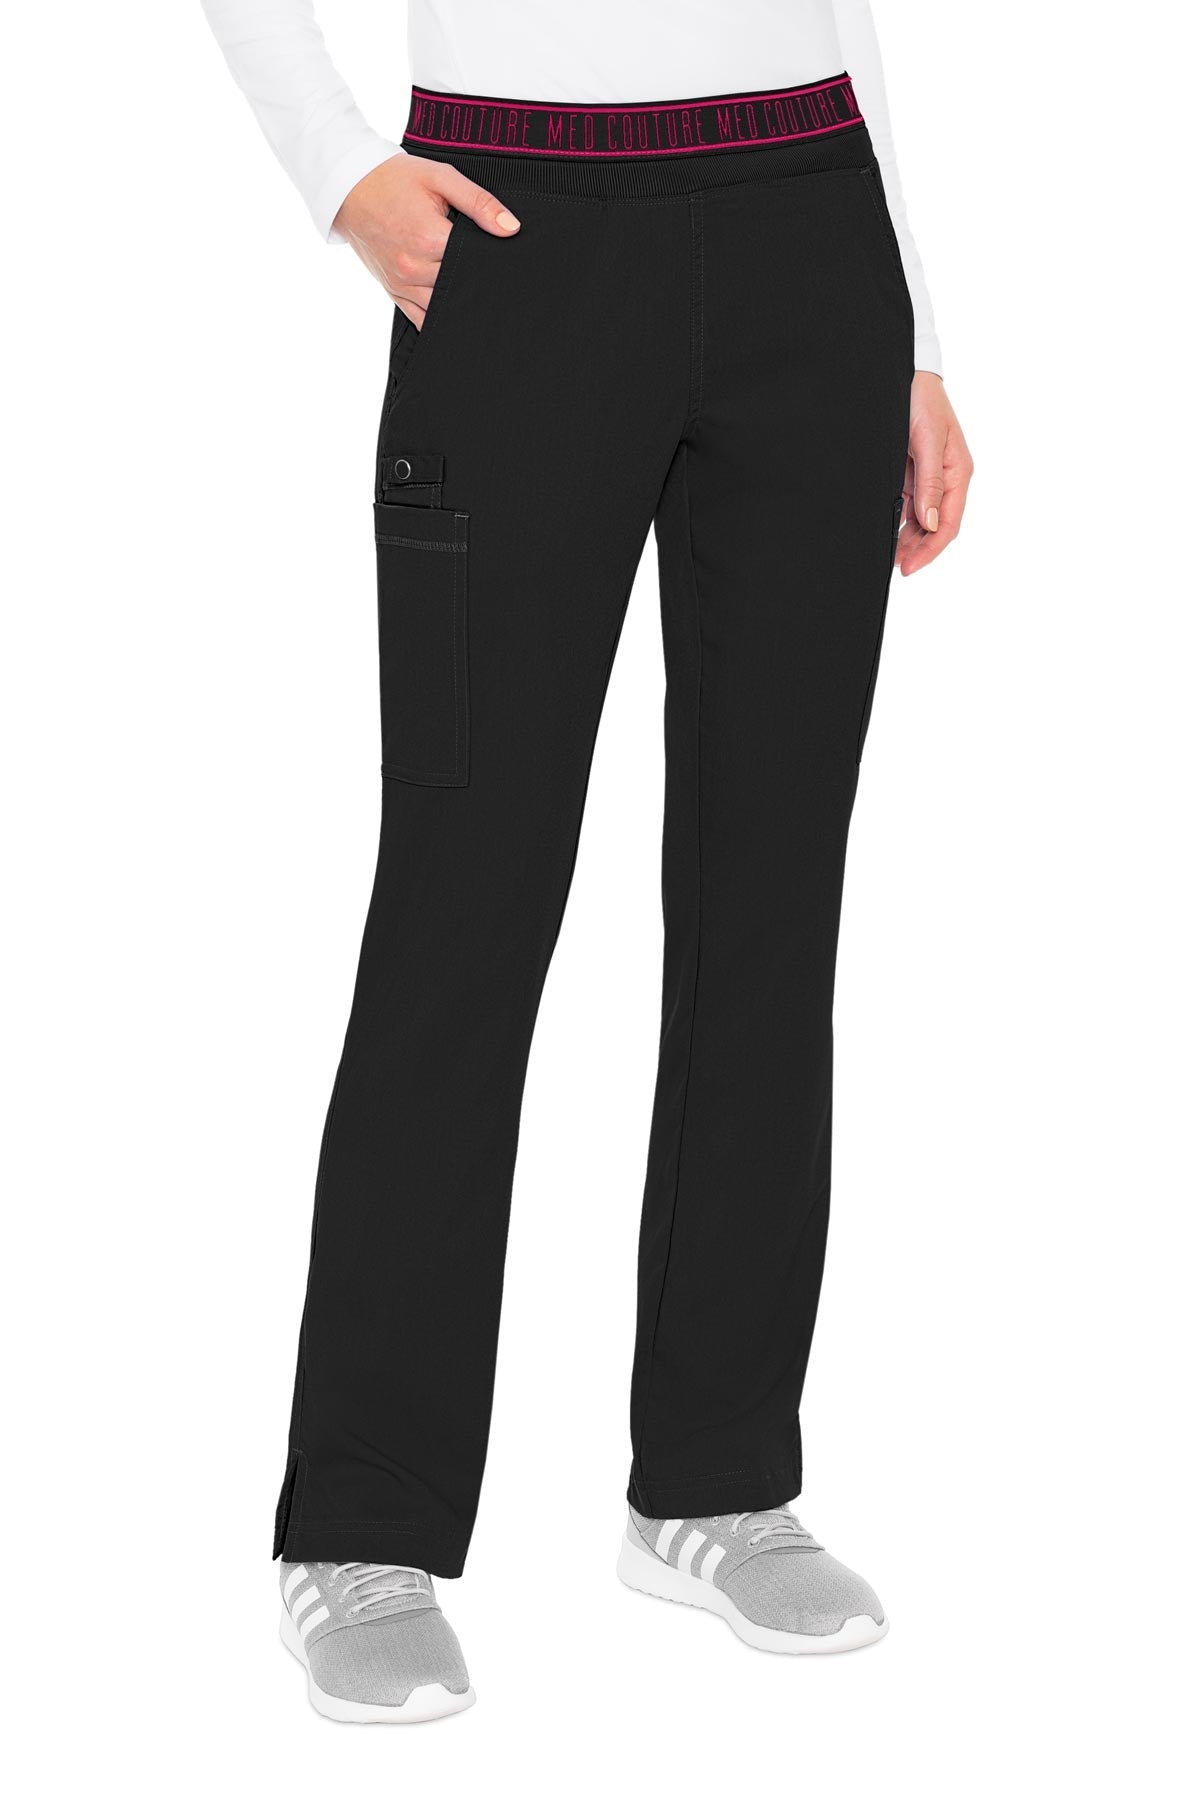 PERSIT Women's Mesh Yoga Pants with 2 Pockets, India